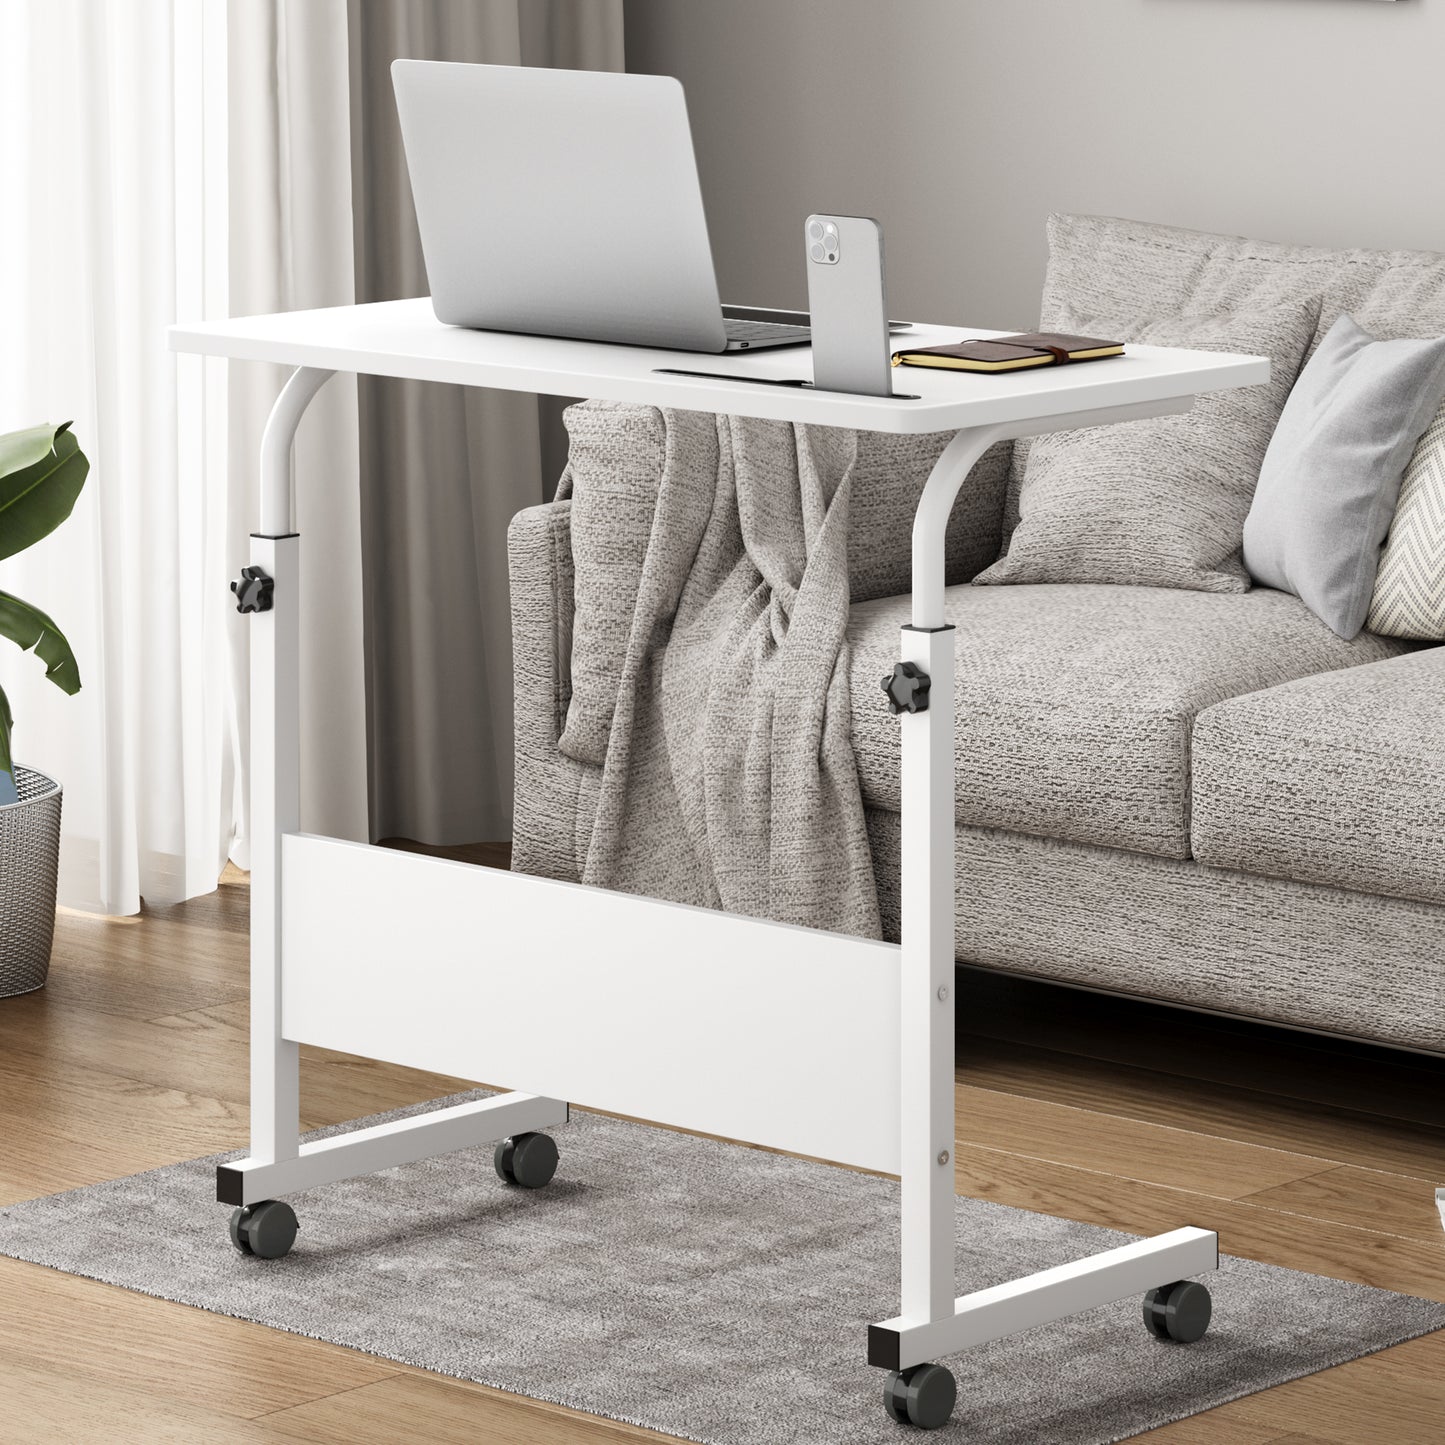 SogesPower Removable Side Desk, Sit-Stand Desk with Adjustable Height, Card Slot